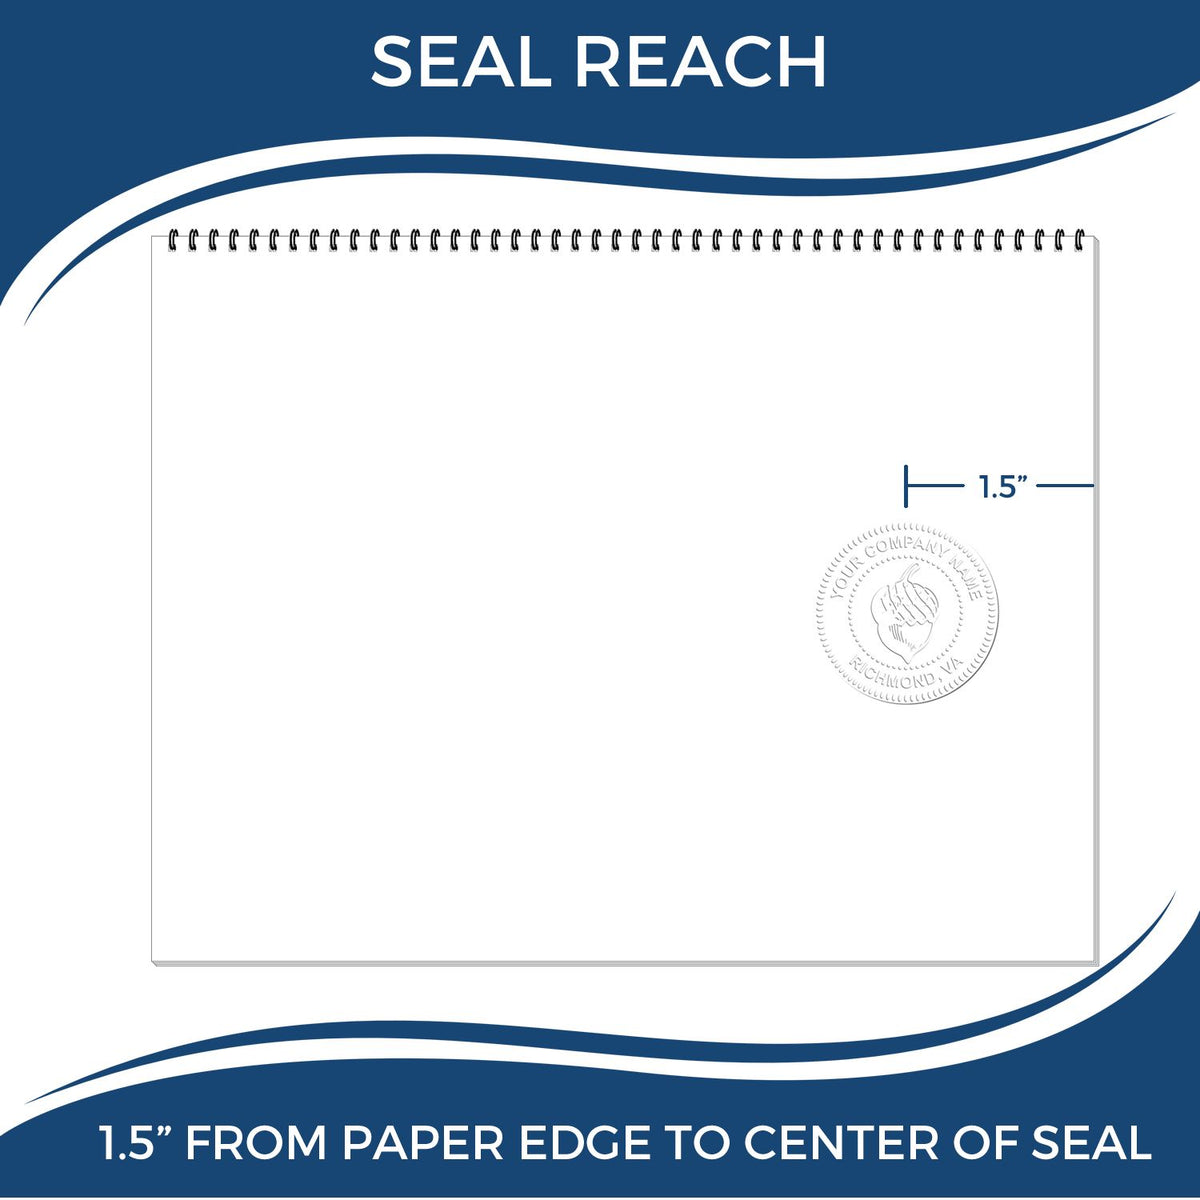 An infographic showing the seal reach which is represented by a ruler and a miniature seal image of the Soft Pocket Indiana Landscape Architect Embosser